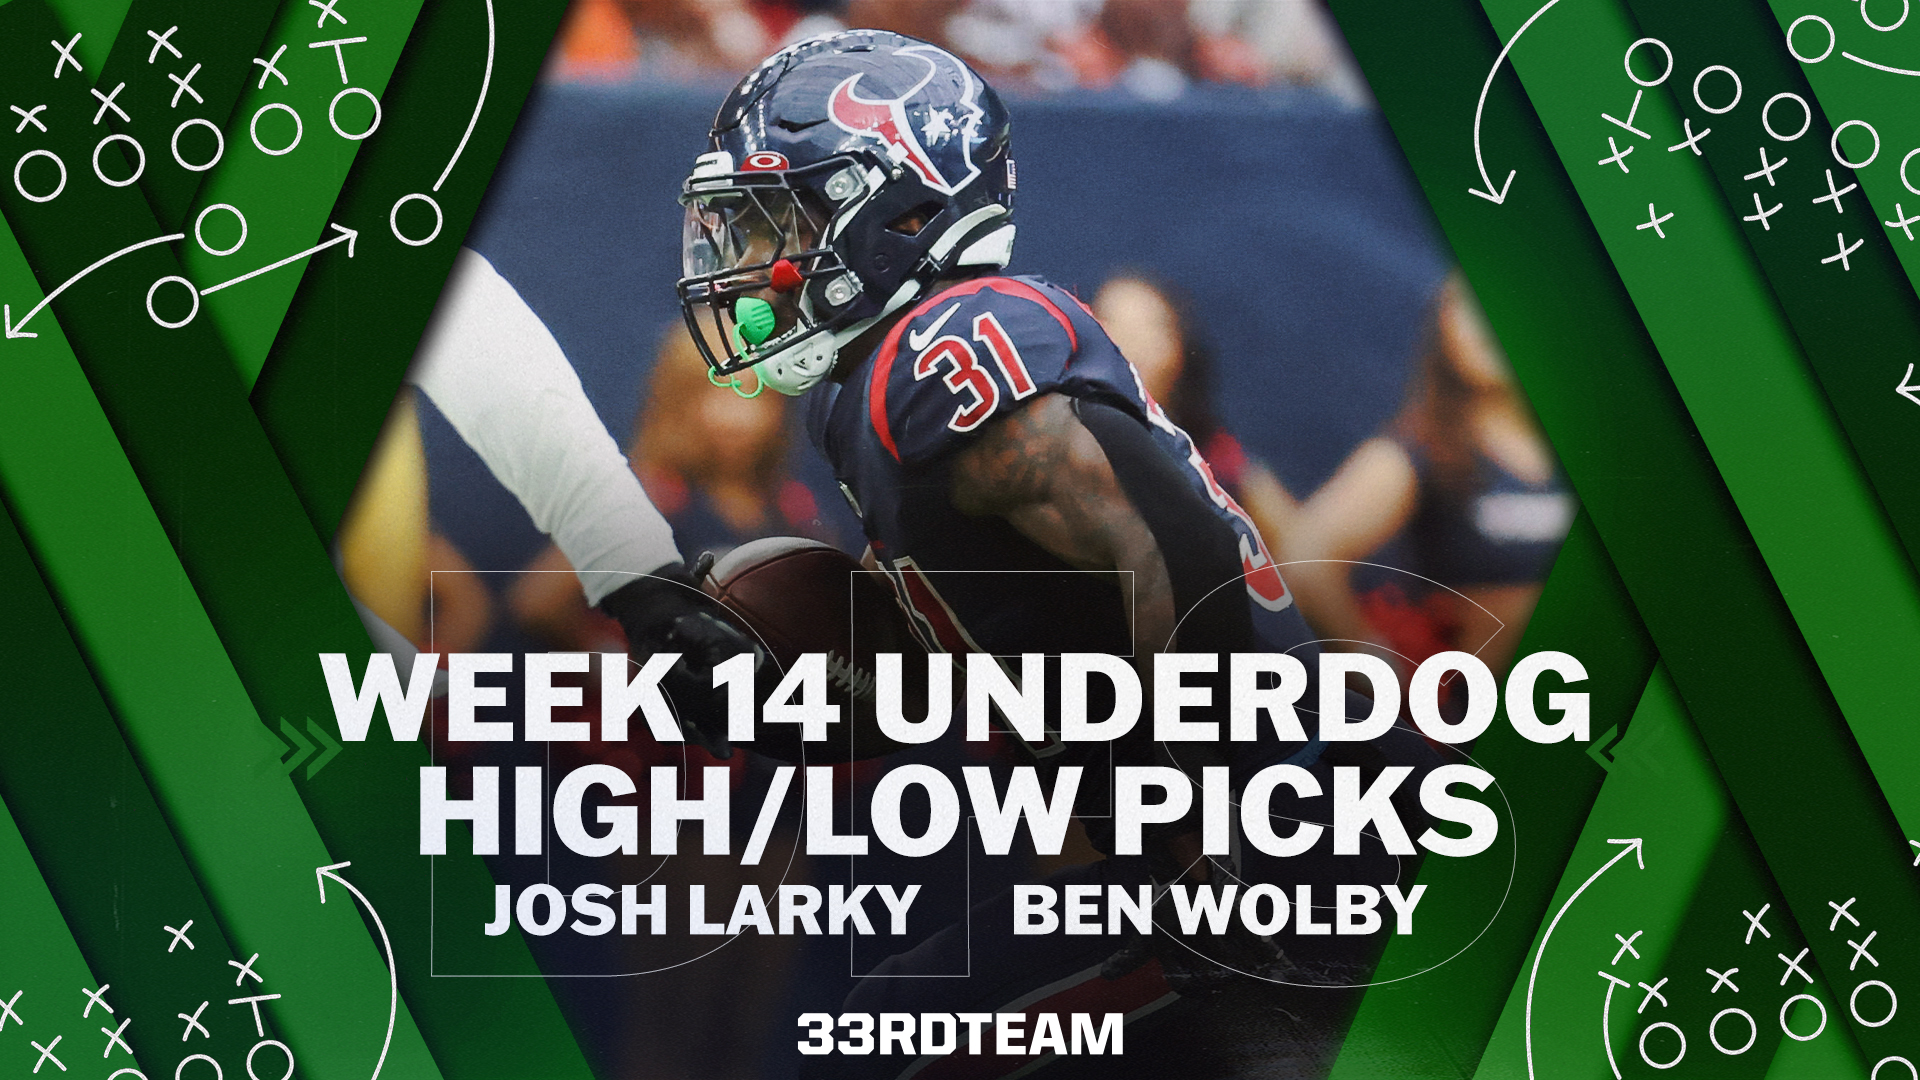 Week 14 Underdog High/Low Picks from Larky and Wolby